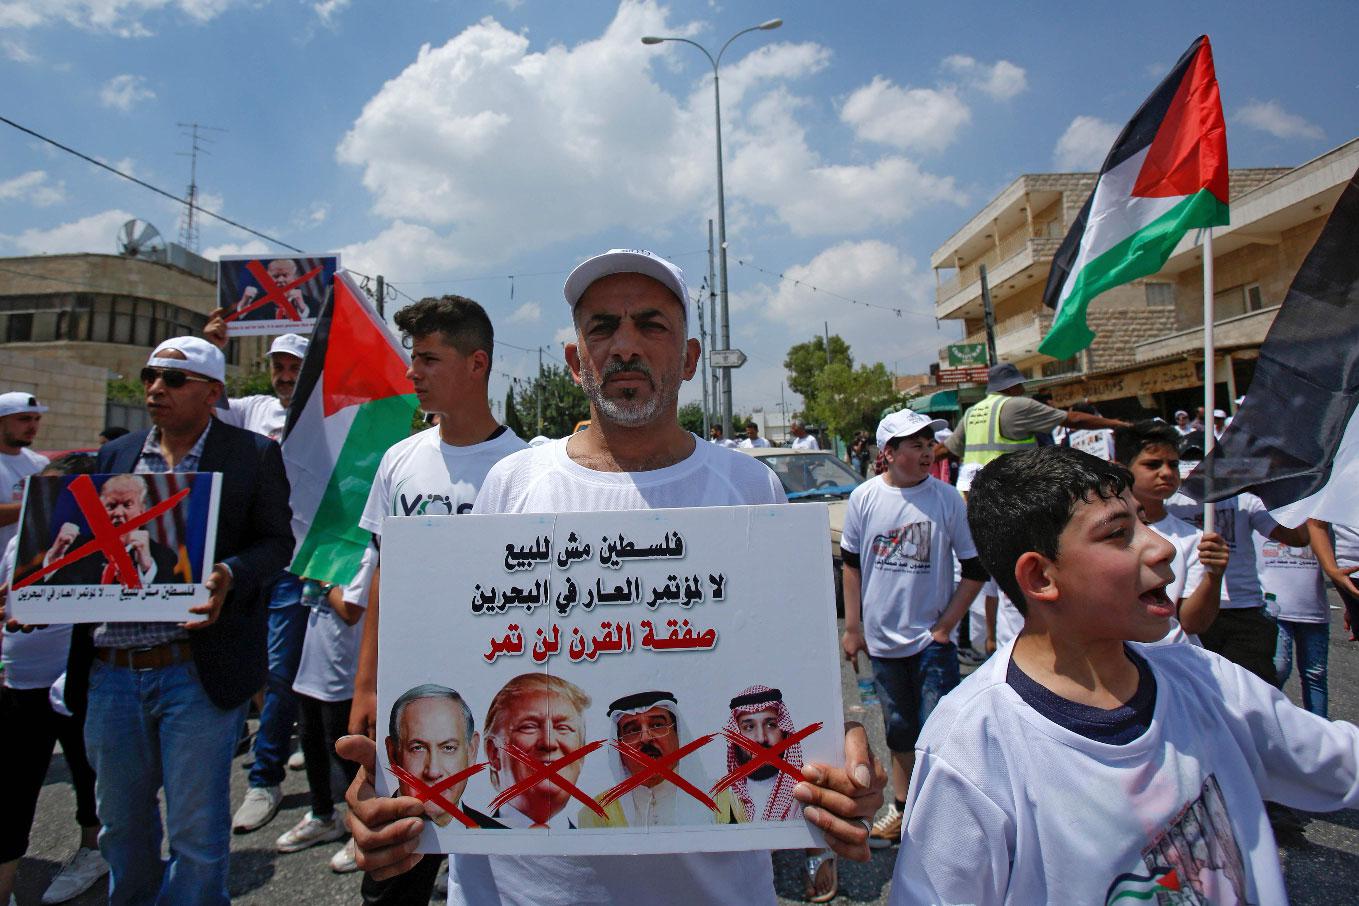 A man holds a protest sign with a caption in Arabic reading "Palestine is not for sale"